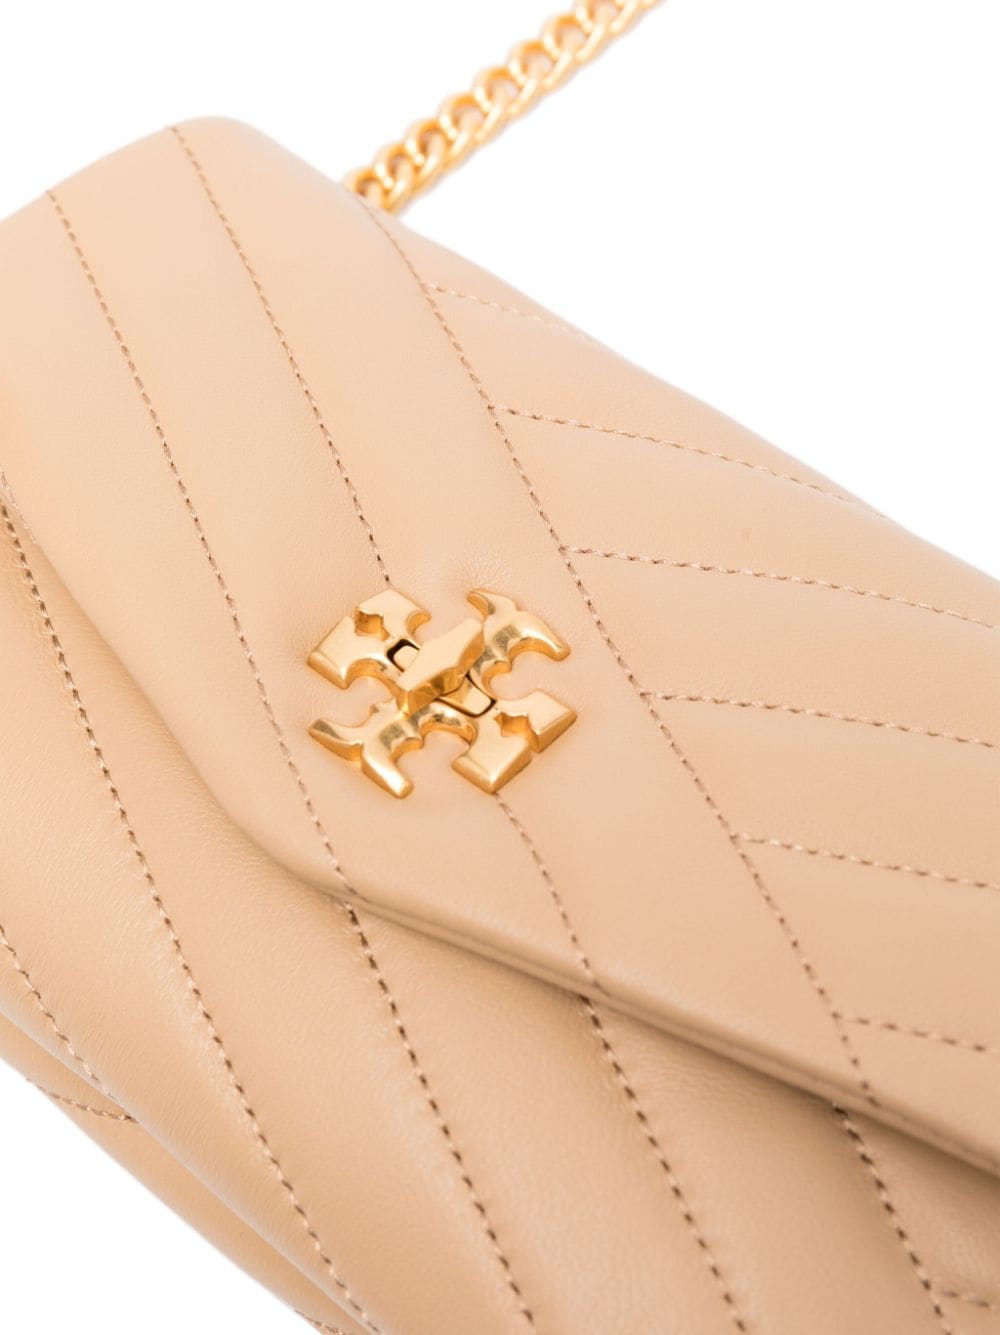 Kira quilted leather crossbody bag<BR/><BR/><BR/>